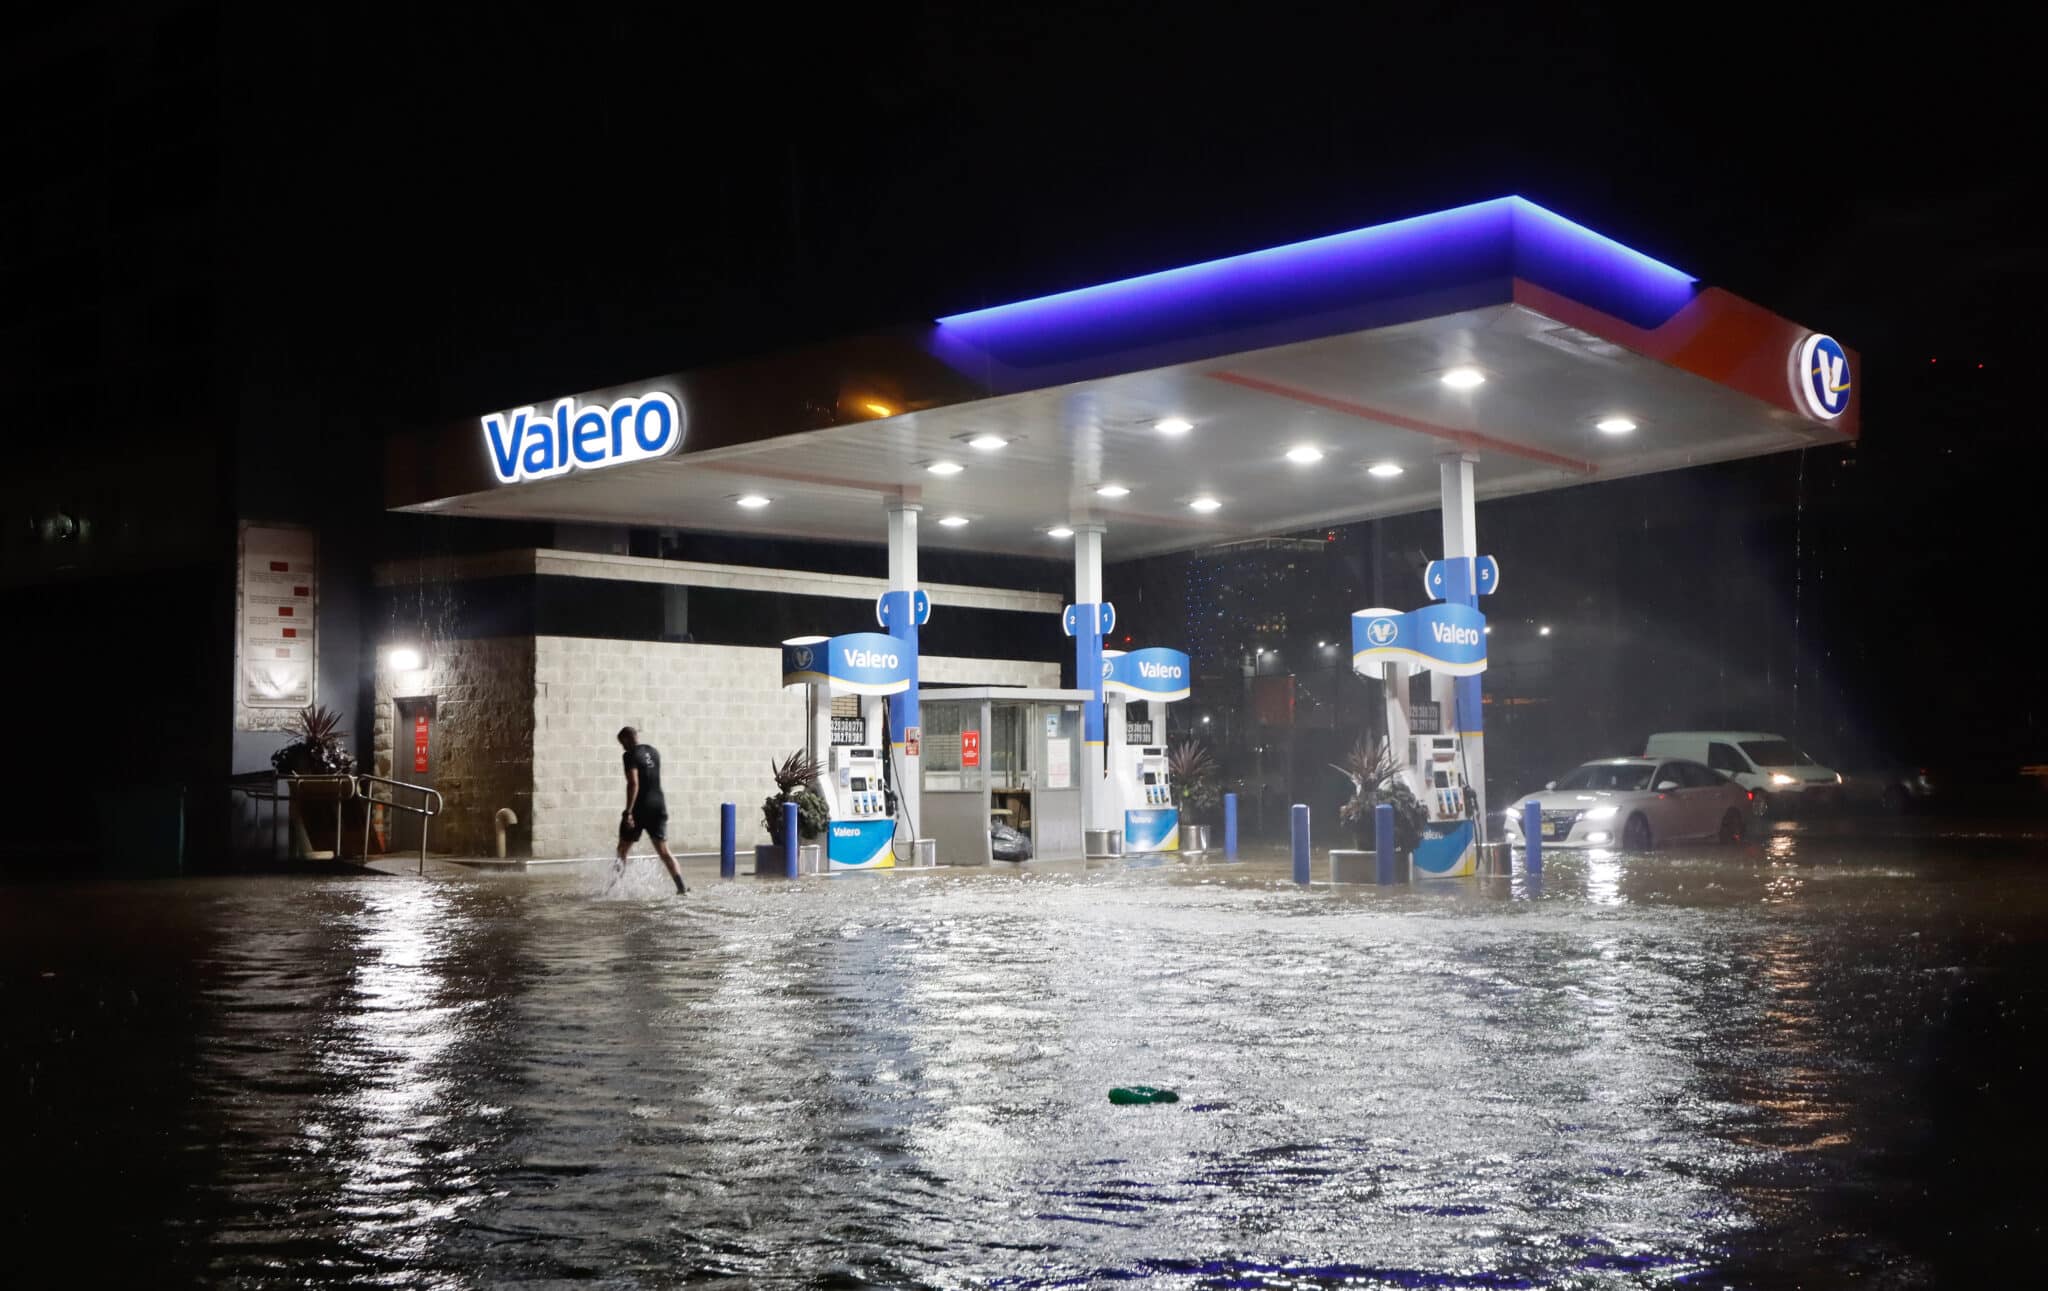 A Valero gas station in the rain.